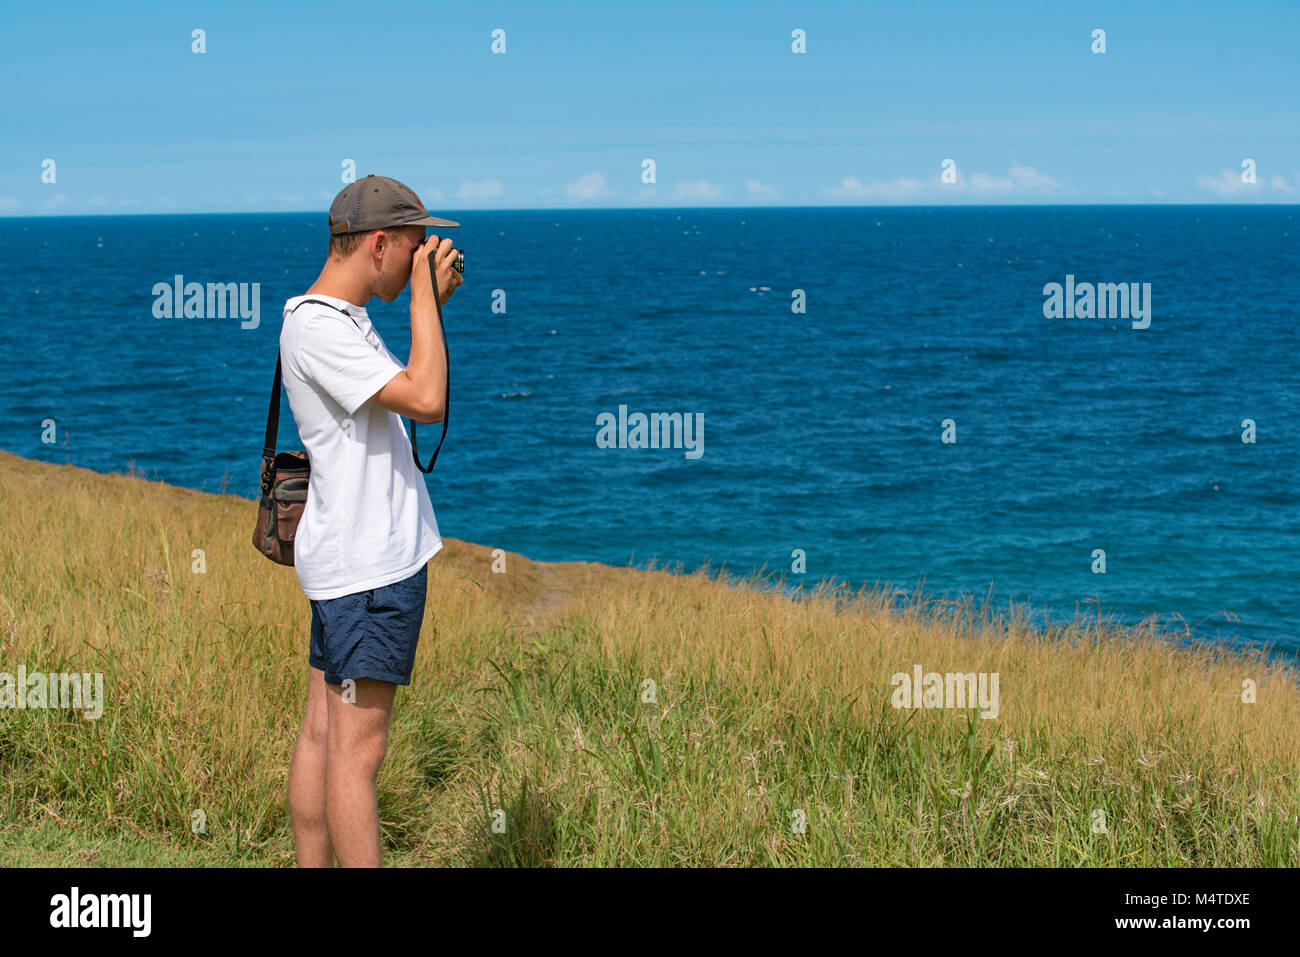 A young man taking photos near the ocean with an analogue SLR camera Stock Photo